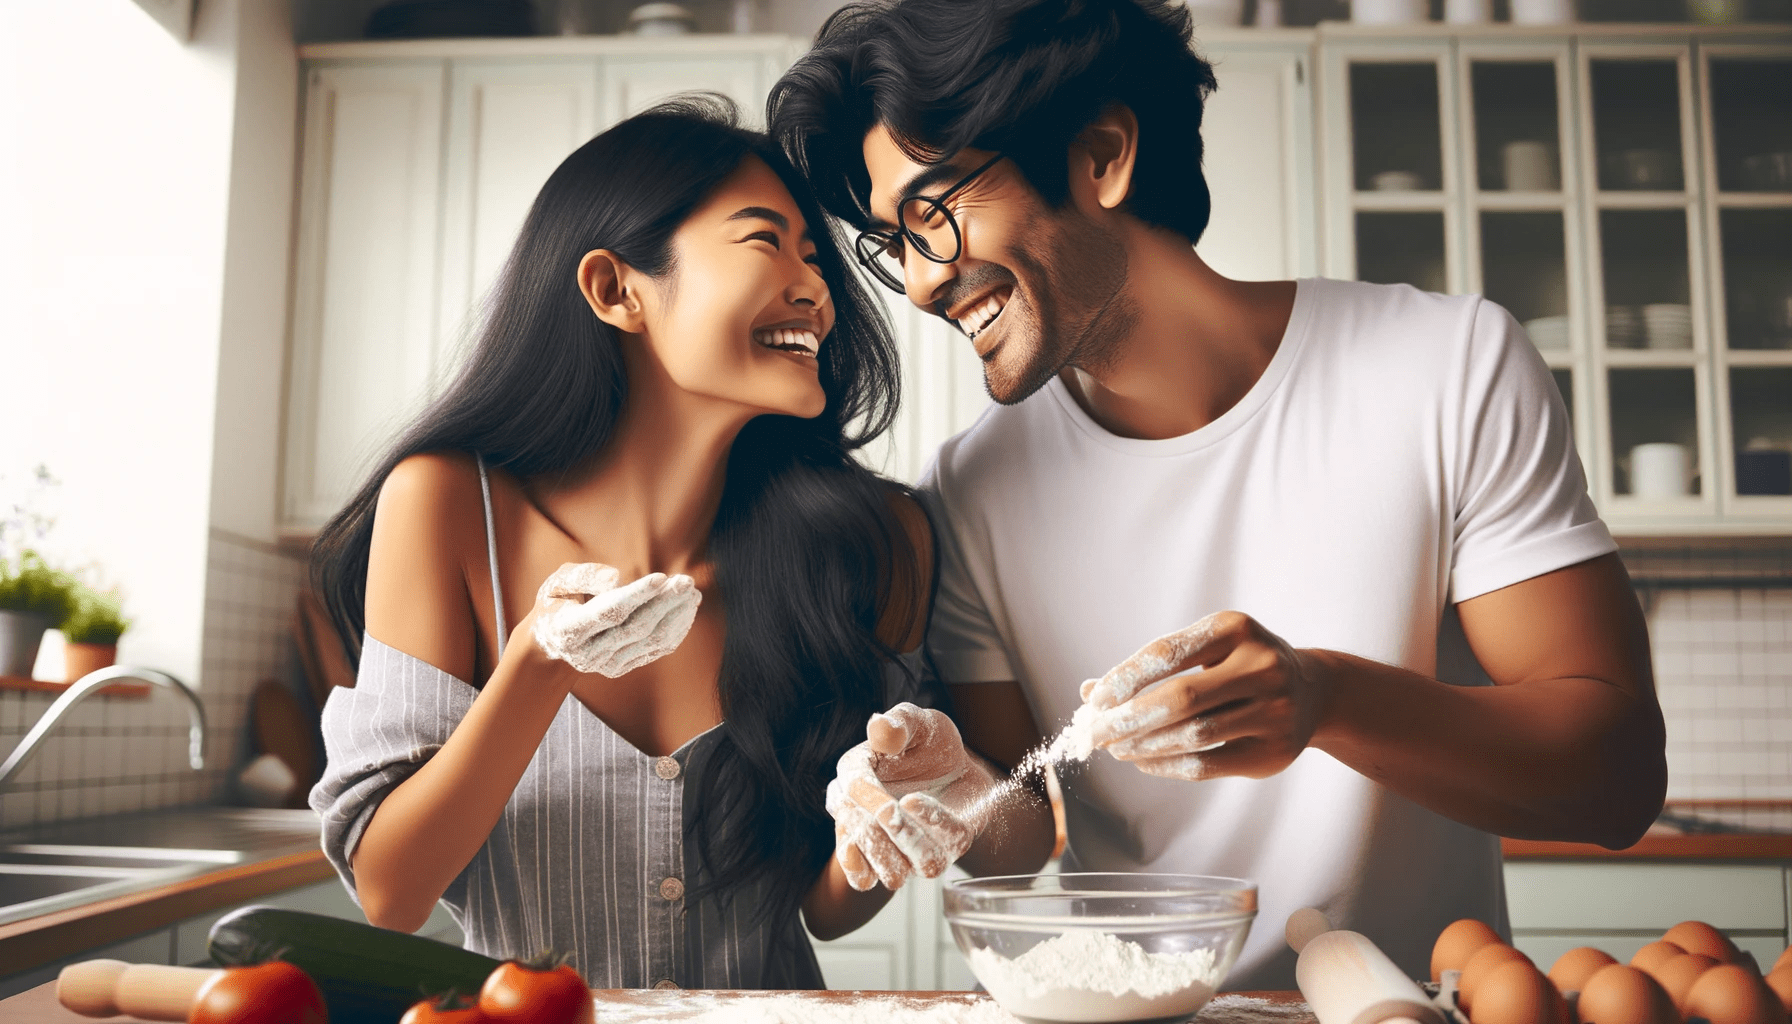 couple a South Asian female with long black hair and an East Asian male with glasses cooking together in a bri